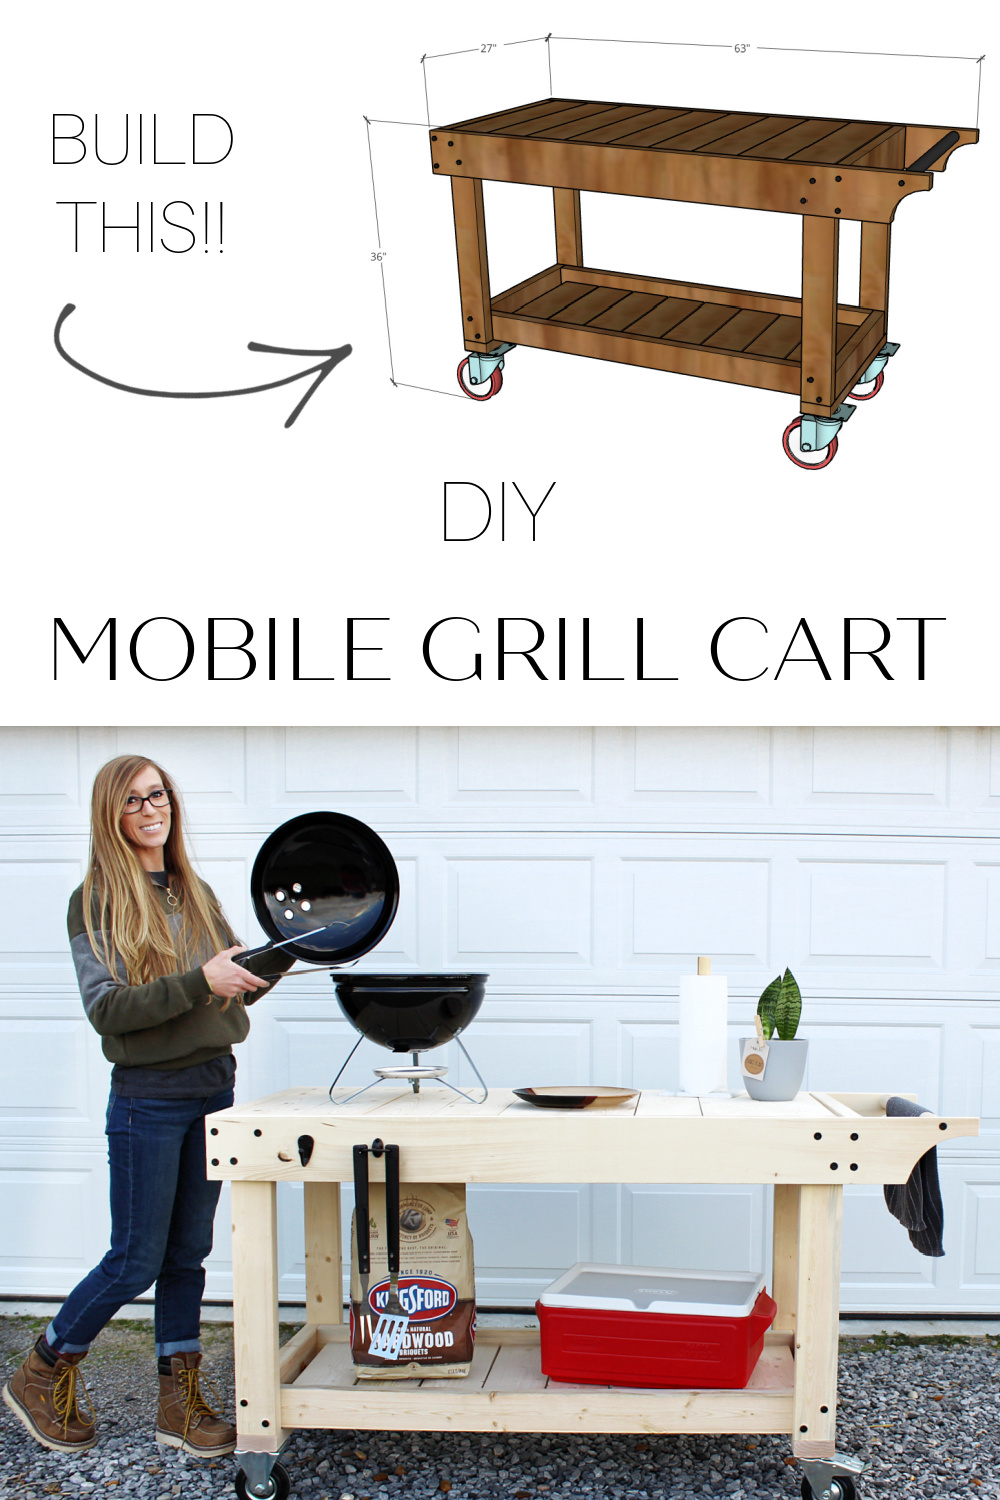 https://www.woodshopdiaries.com/wp-content/uploads/2021/03/Mobile-grill-cart-pin-image.jpg